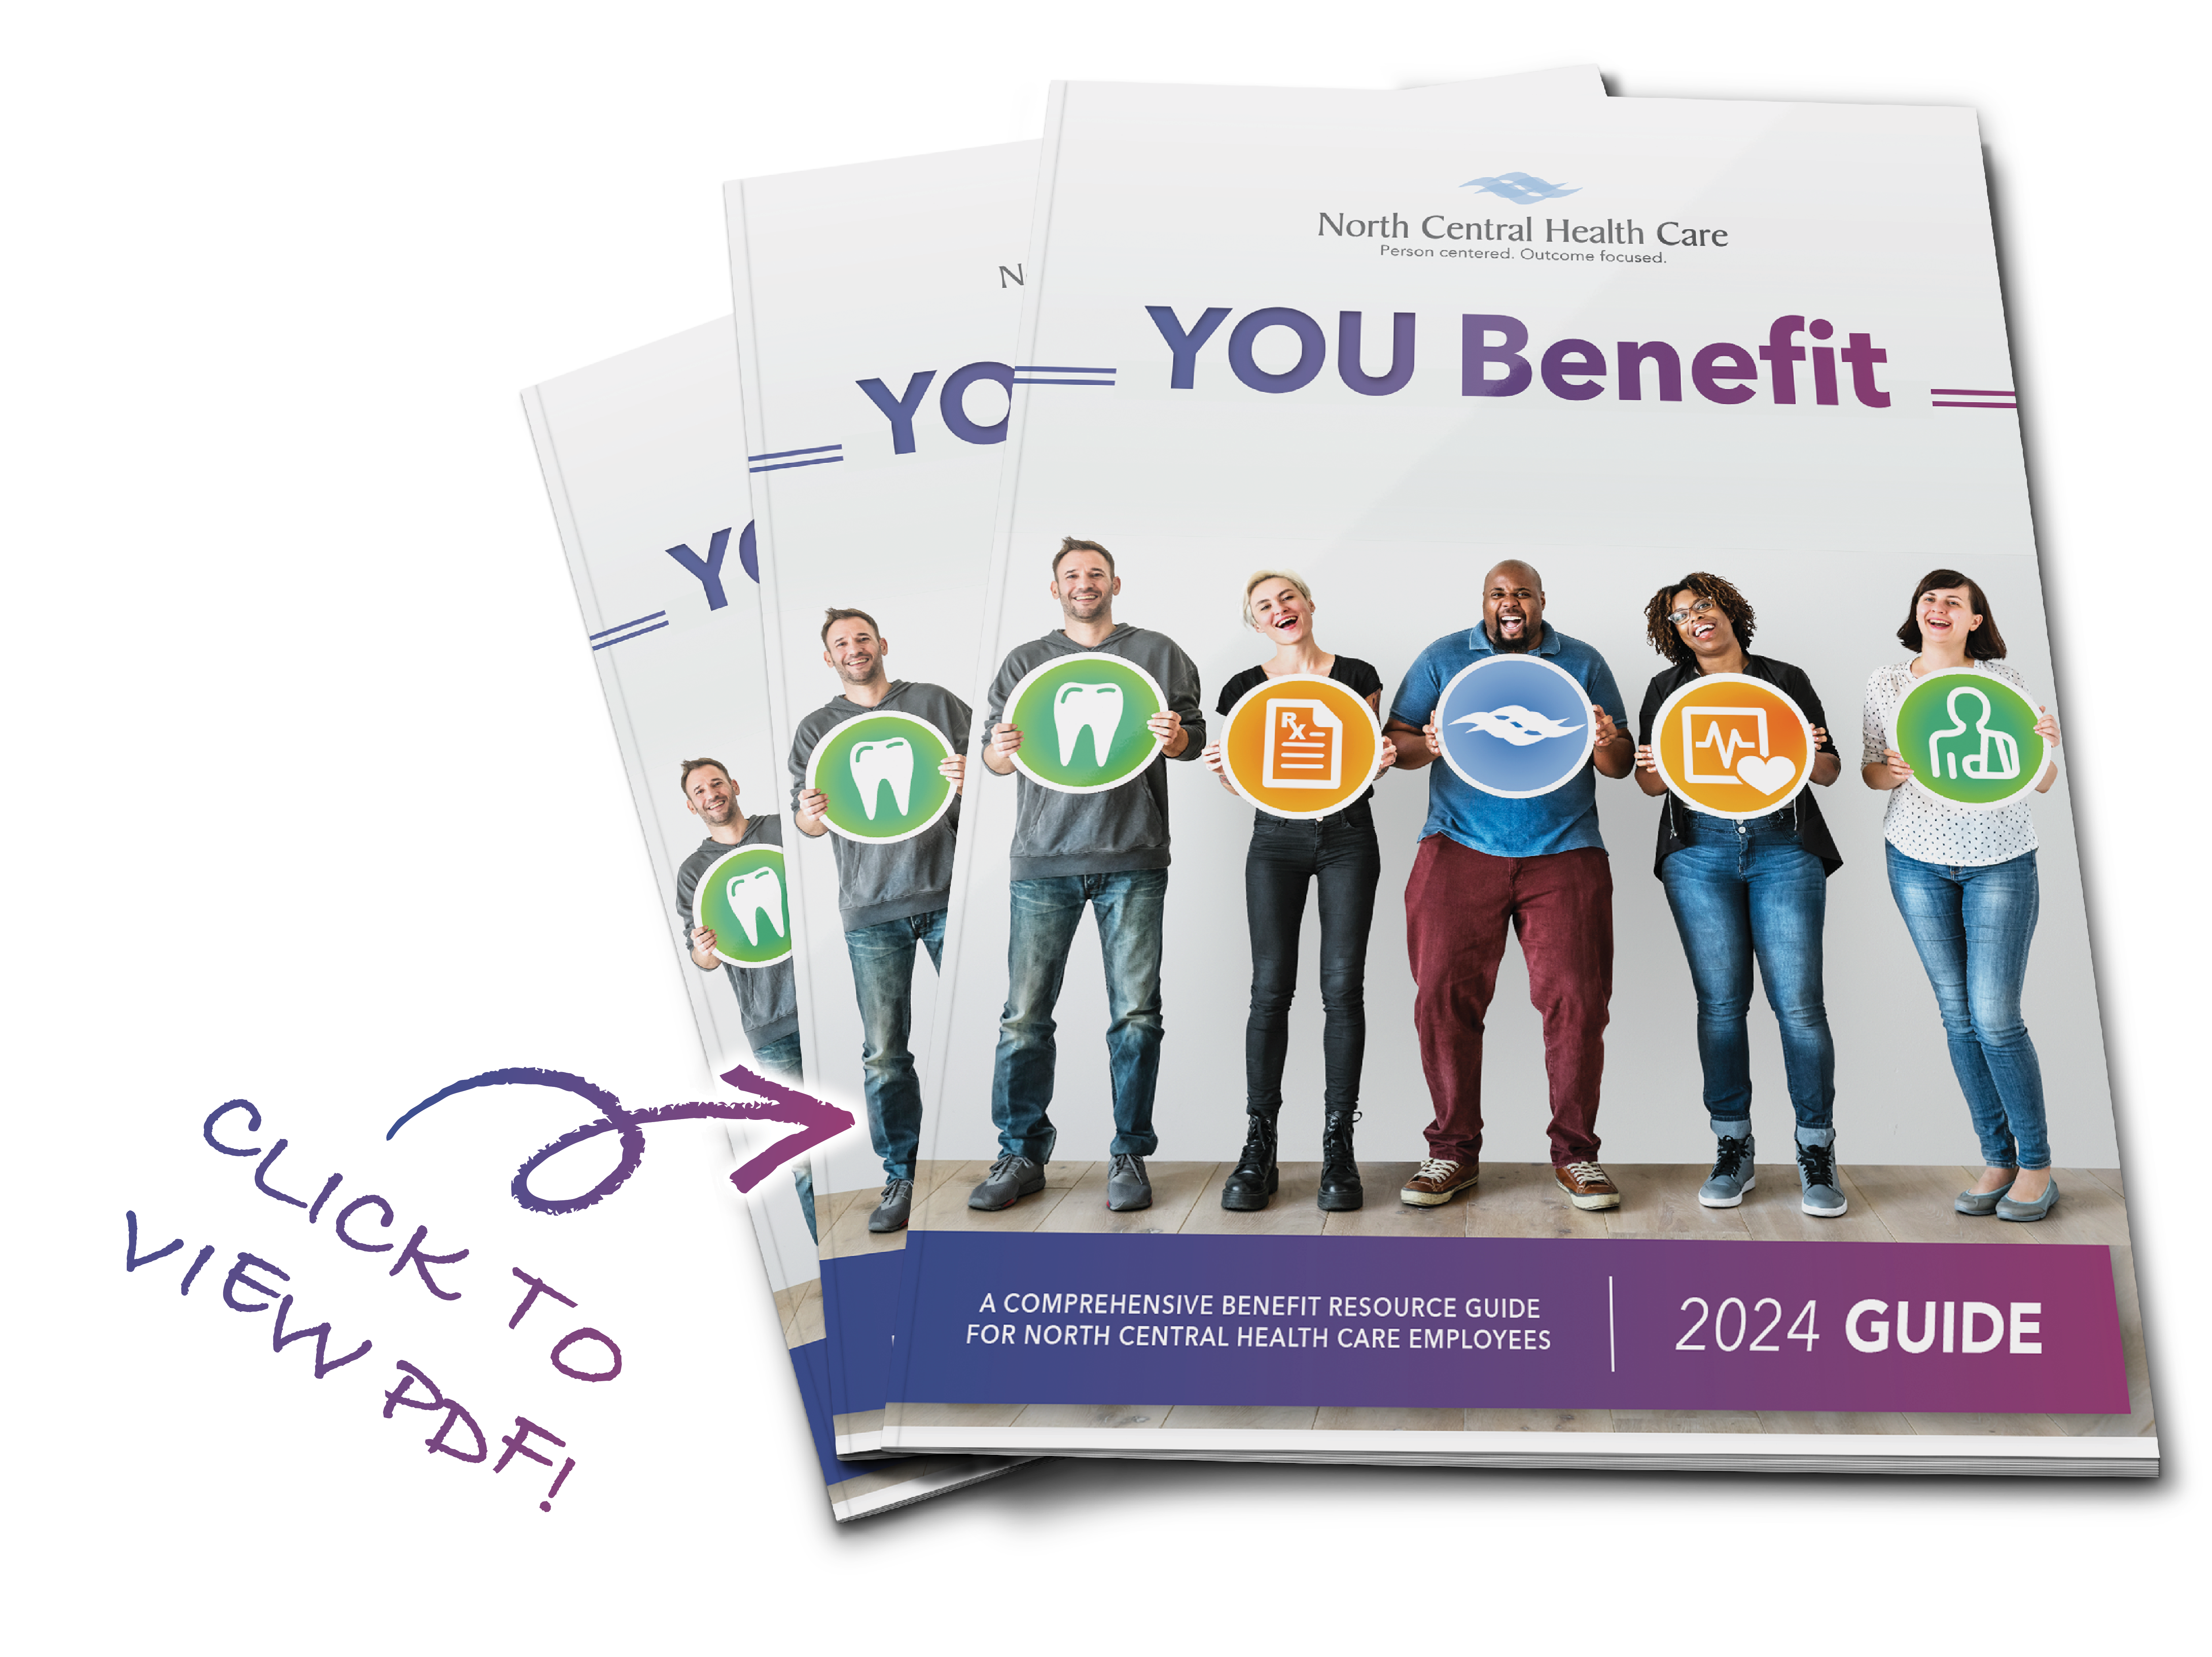 Click to View the 2021 YOU Benefit Guide